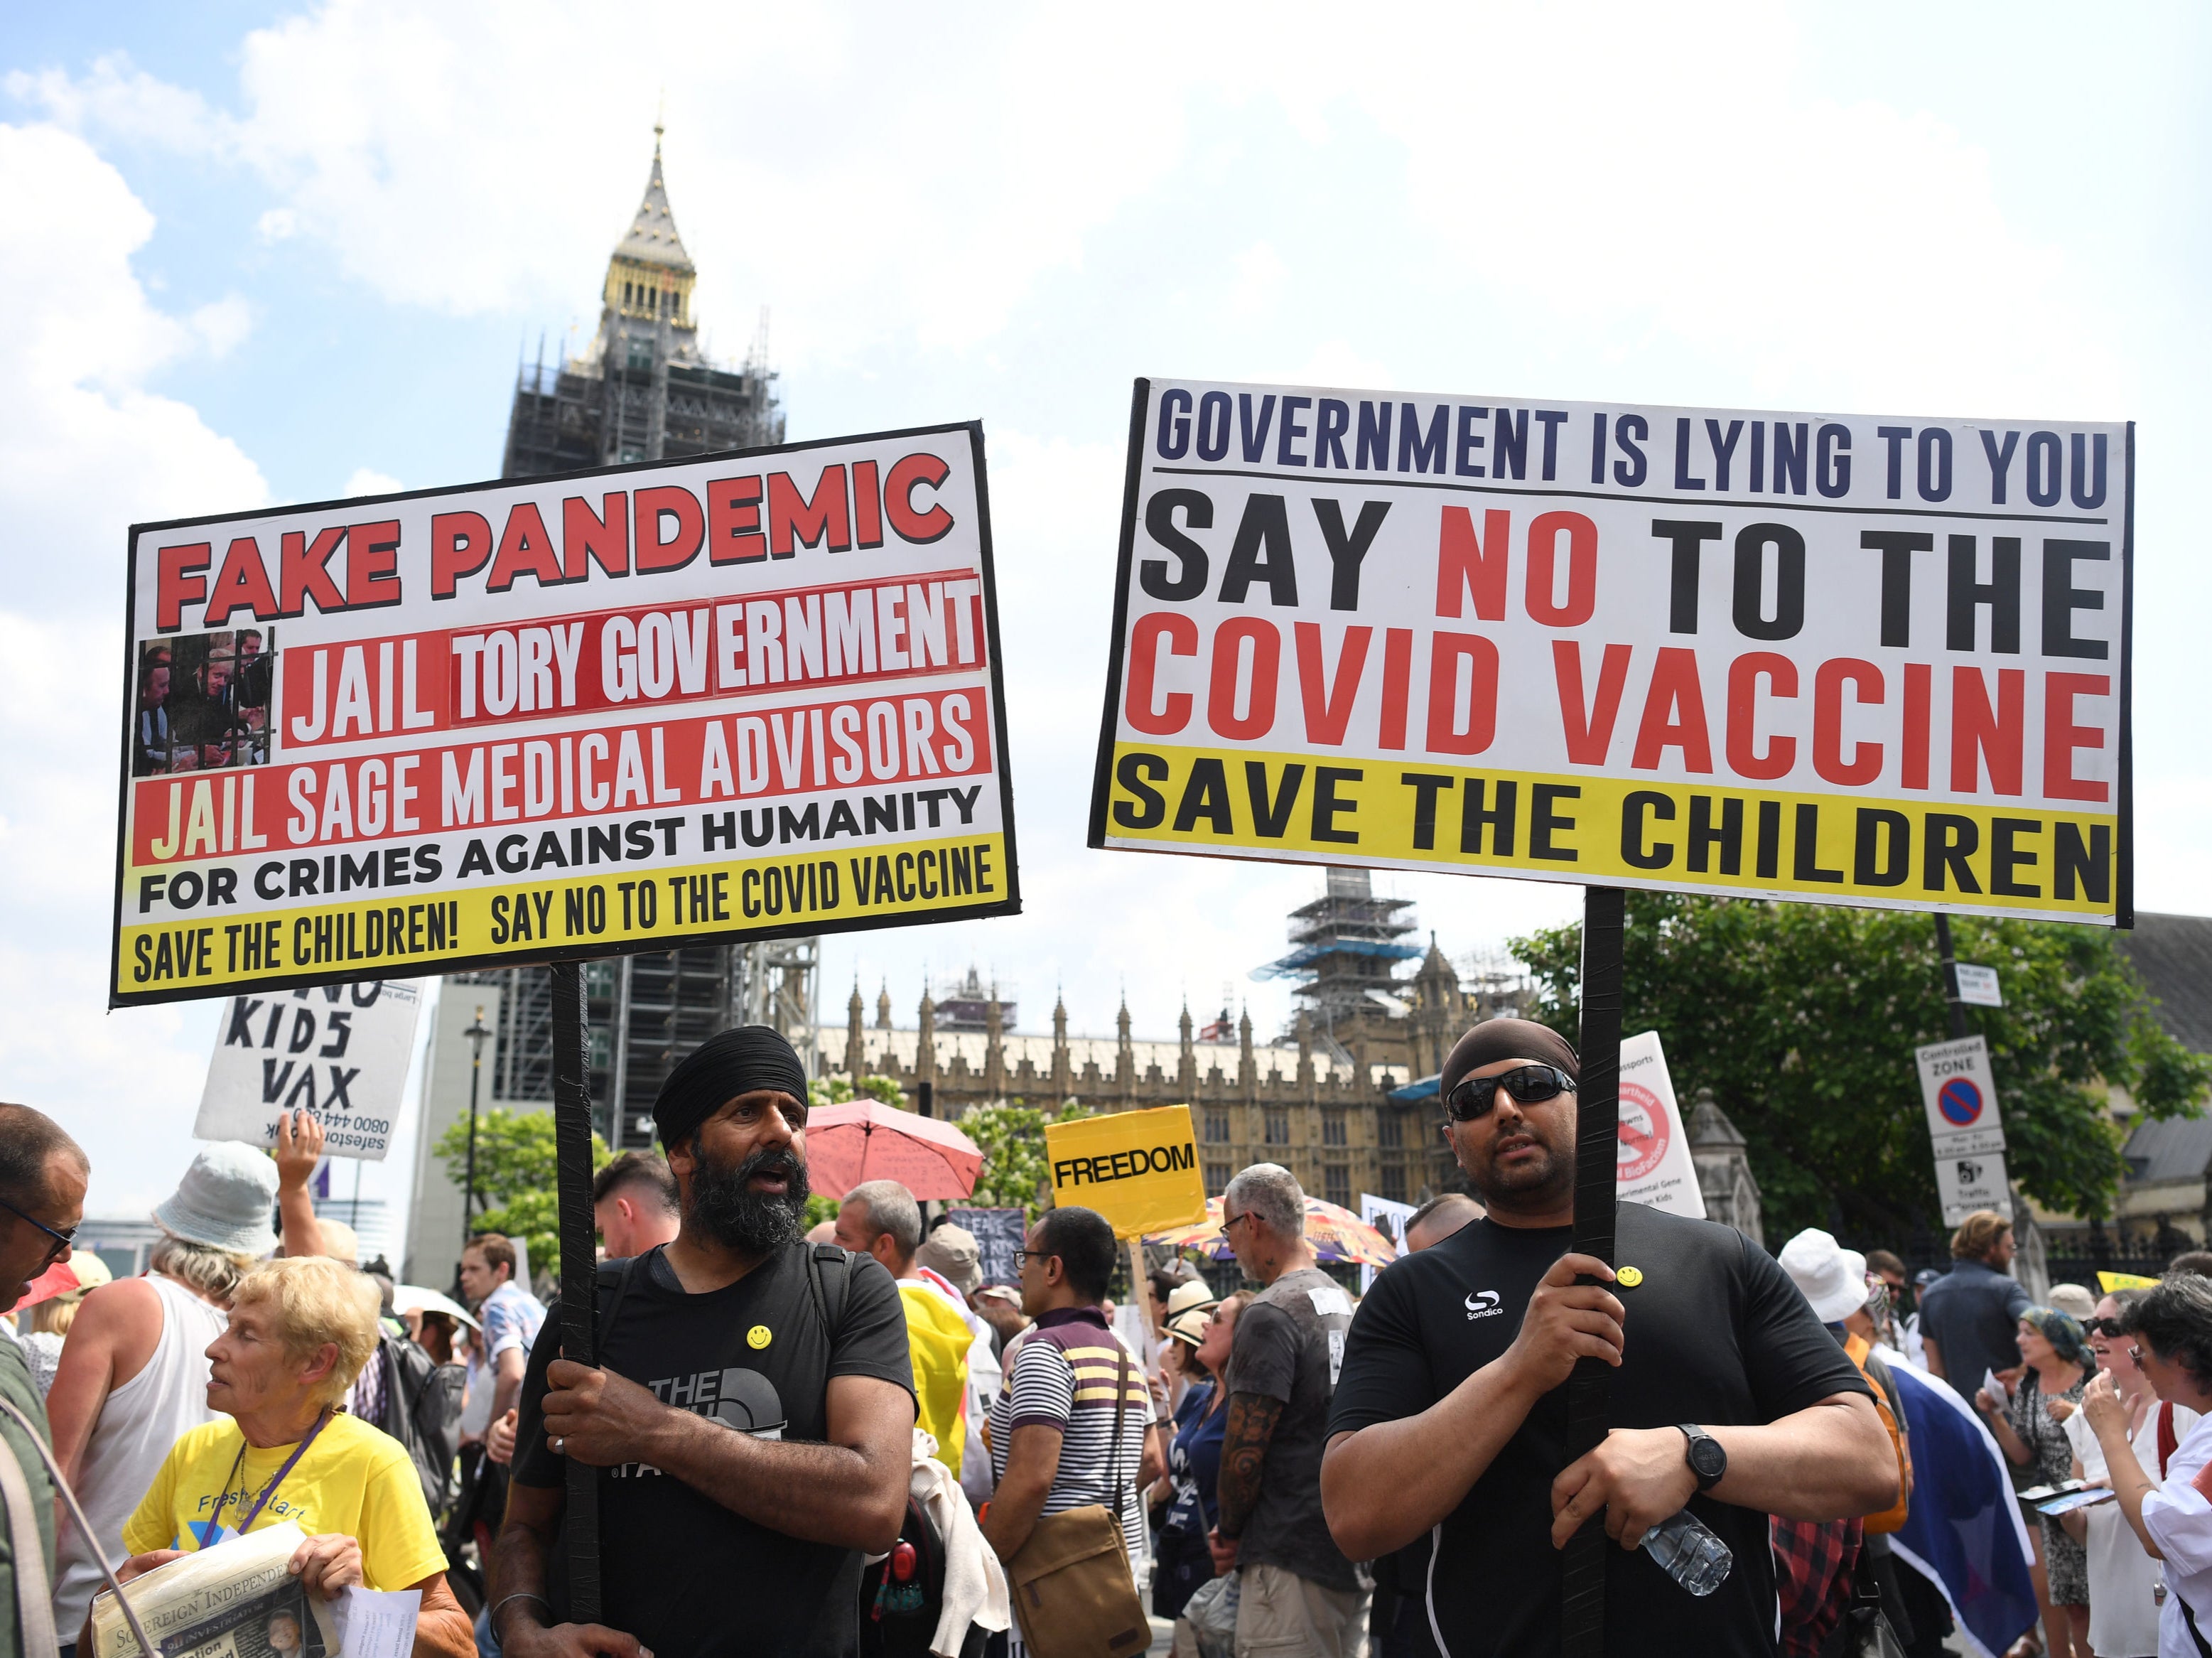 An anti-vax protest in London in July